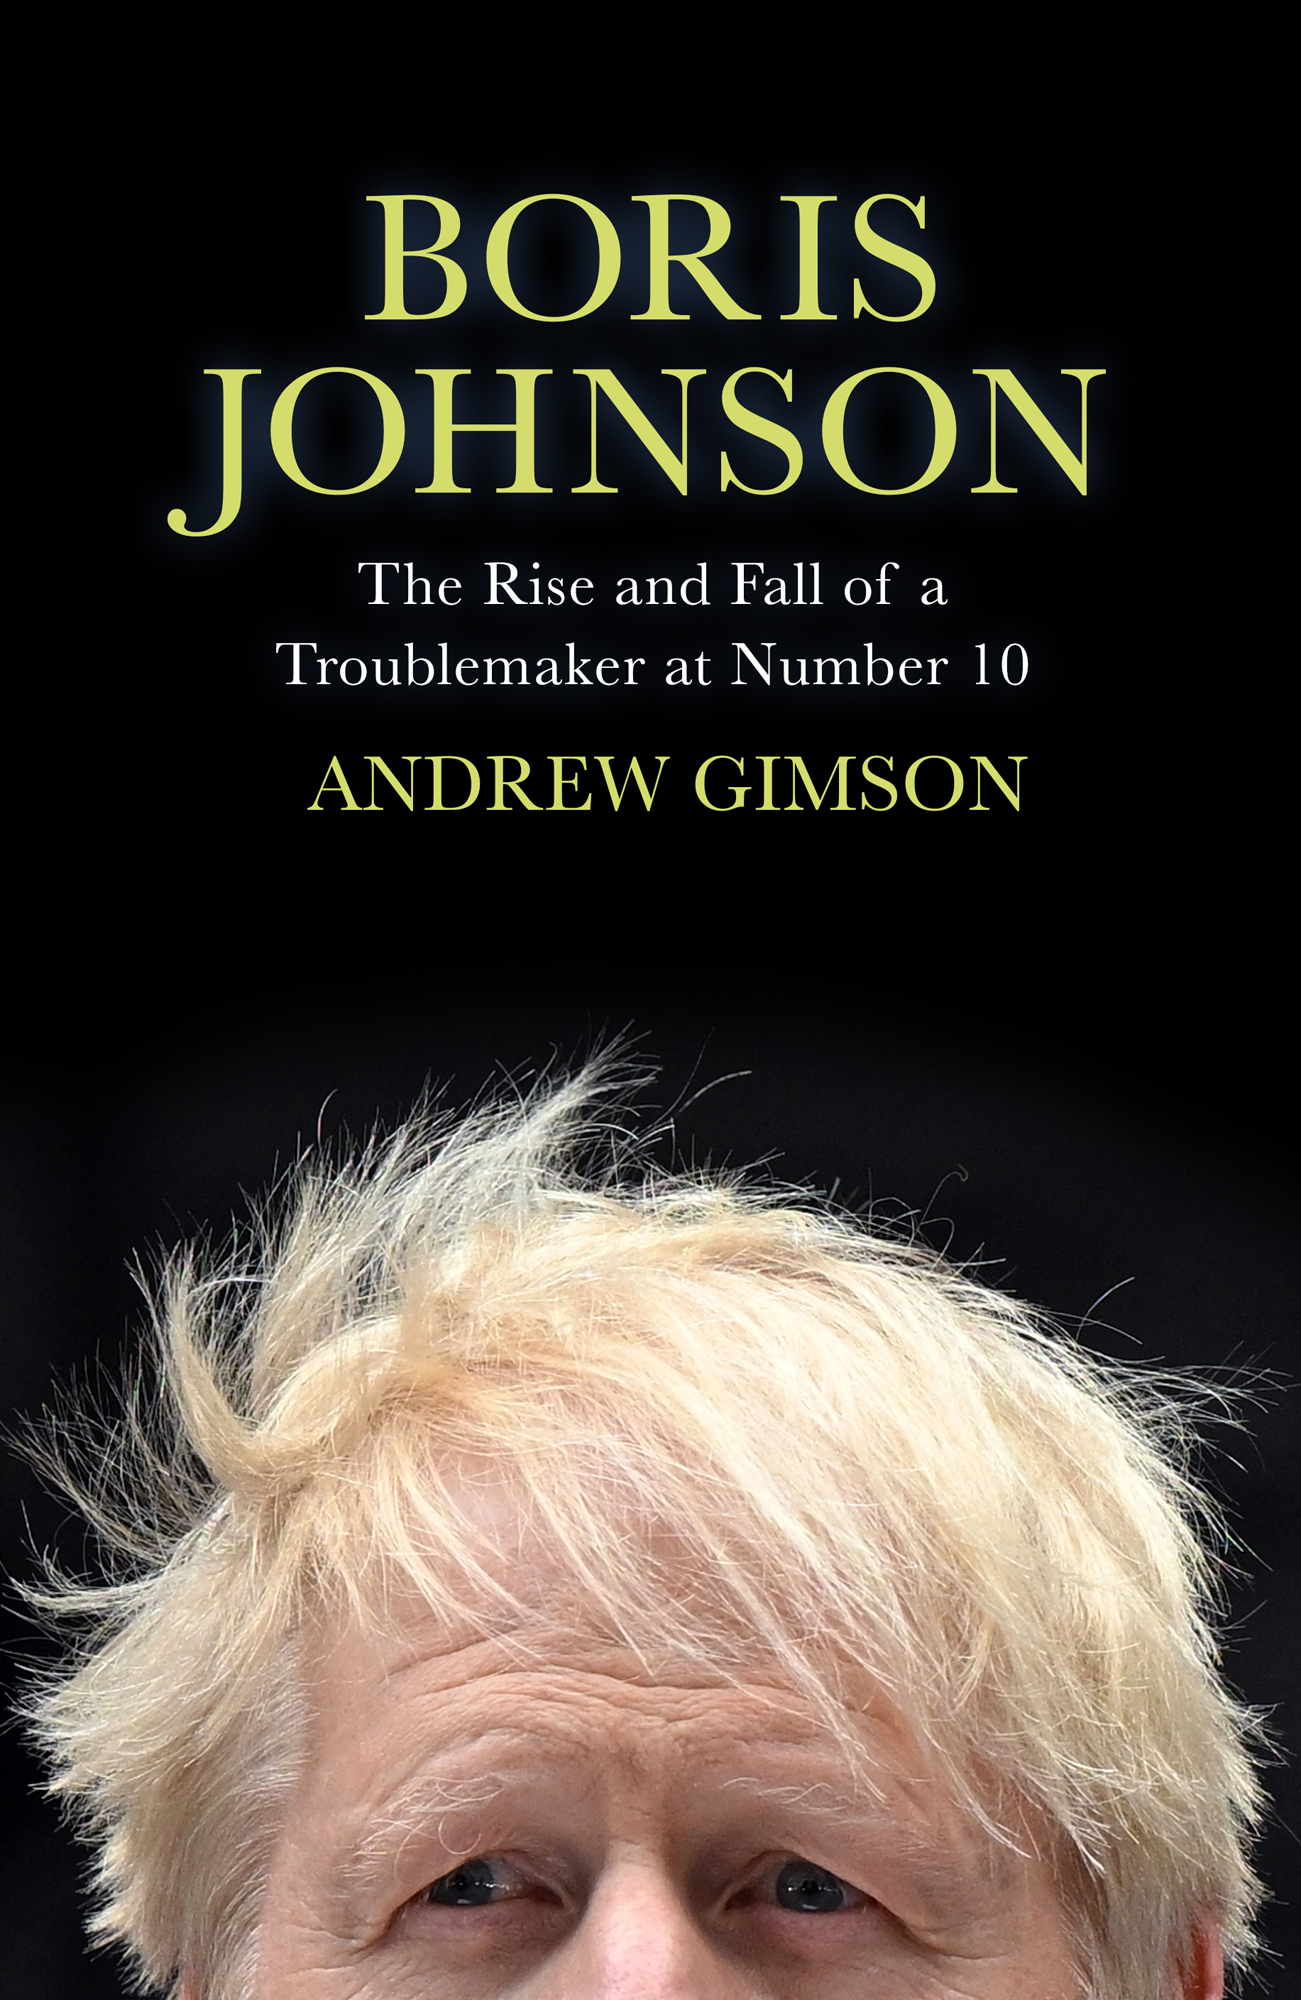 Boris Johnson The Rise and Fall of a Troublemaker at Number 10 Andrew Gimson - photo 1